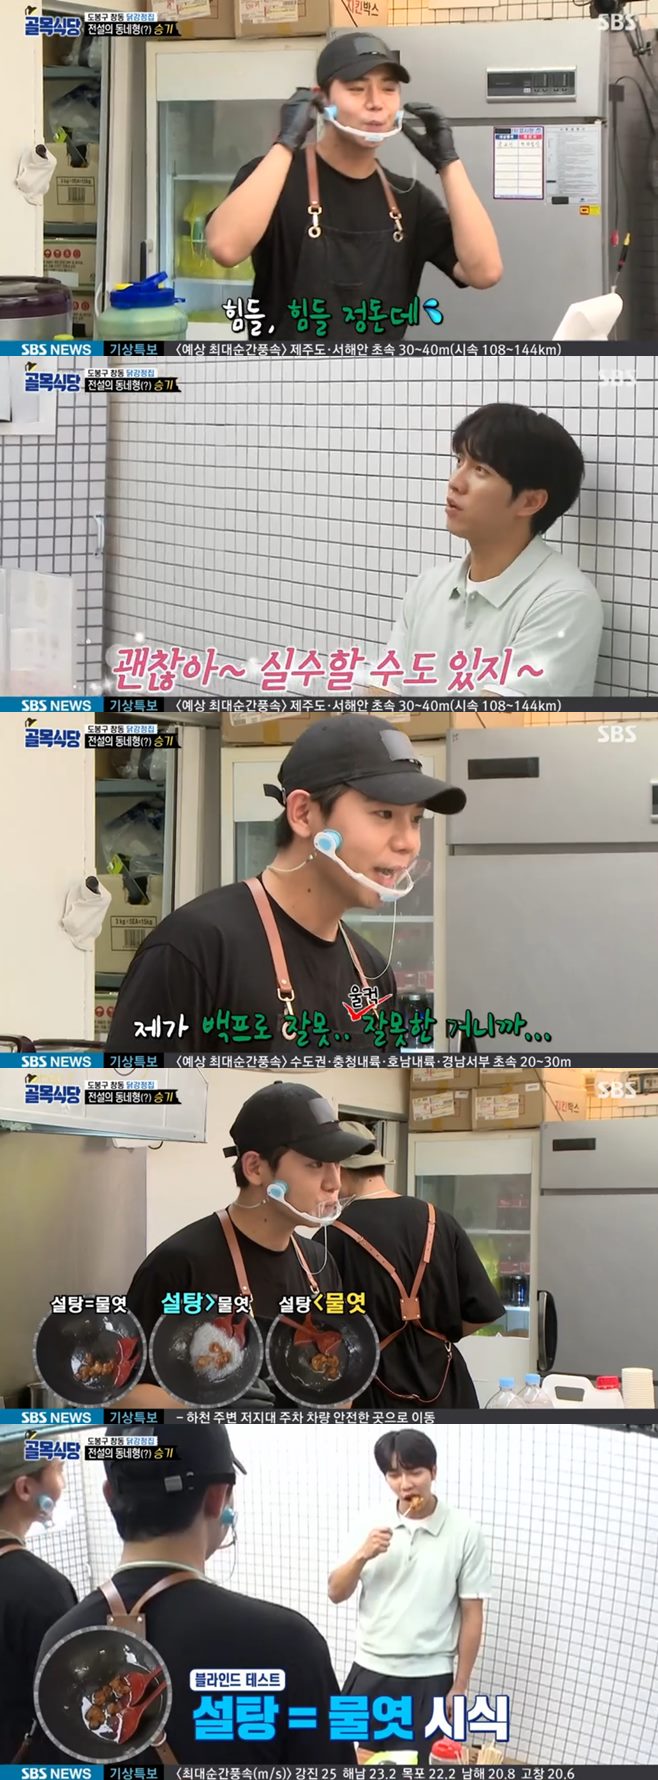 Lee Seung-gi, a star of Sanggye High School from Nowon-gu, Baek Jong-won The alley restaurant, added interest to his visit to Chang-dong chicken gangjeong.In the SBS entertainment program Baek Jong-wons The Alley Restaurant, which was broadcast on the night of the 26th, Baek Jong-won, Kim Seong-joo, Jung In-sun, guest Italian food expert Fabry chef, Super Junior Kyuhyun, singer and actor Lee Seung-gi from Sanggye High School, A project to rehabilitate pasta and NO delivery pizza houses has been unveiled.Lee Seung-gi is from Sanggye-dong, Nowon-gu, and he expressed his attachment to the neighborhood and said, Hey, thats where I used to ride a bicycle.Baek Jong-won sent Lee Seung-gi support to Chang-dong chicken gangjeongjib and said, You should look at the taste and teach it hard.Two bosses at Chang-dong chicken gangjeong were also very surprised to see Lee Seung-gi, who also backed away when they saw Lee Seung-gi.Lee Seung-gi approached comfortably, saying that Chang-dong chicken gangjeong bosses were from Chang-dong.He did not hesitate to investigate the commercial area, saying, Where is the customer target? Lee Seung-gi explained, I came to see size, fries.Lee Seung-gi did not hesitate to say that his boss face was handsome, such as his age and his rescue. Legend Lee Seung-gi was so.Like a local friend, Kim Seong-joo was impressed by Lee Seung-gis talk skills.Chang-dong Chicken Gangjeong House bosses were very nervous and did their best to offer menus such as garlic chicken Gangjeong.Lee Seung-gi gave Baek Jong-won a hearty boss like a brother and warmly said, I have to do it all.